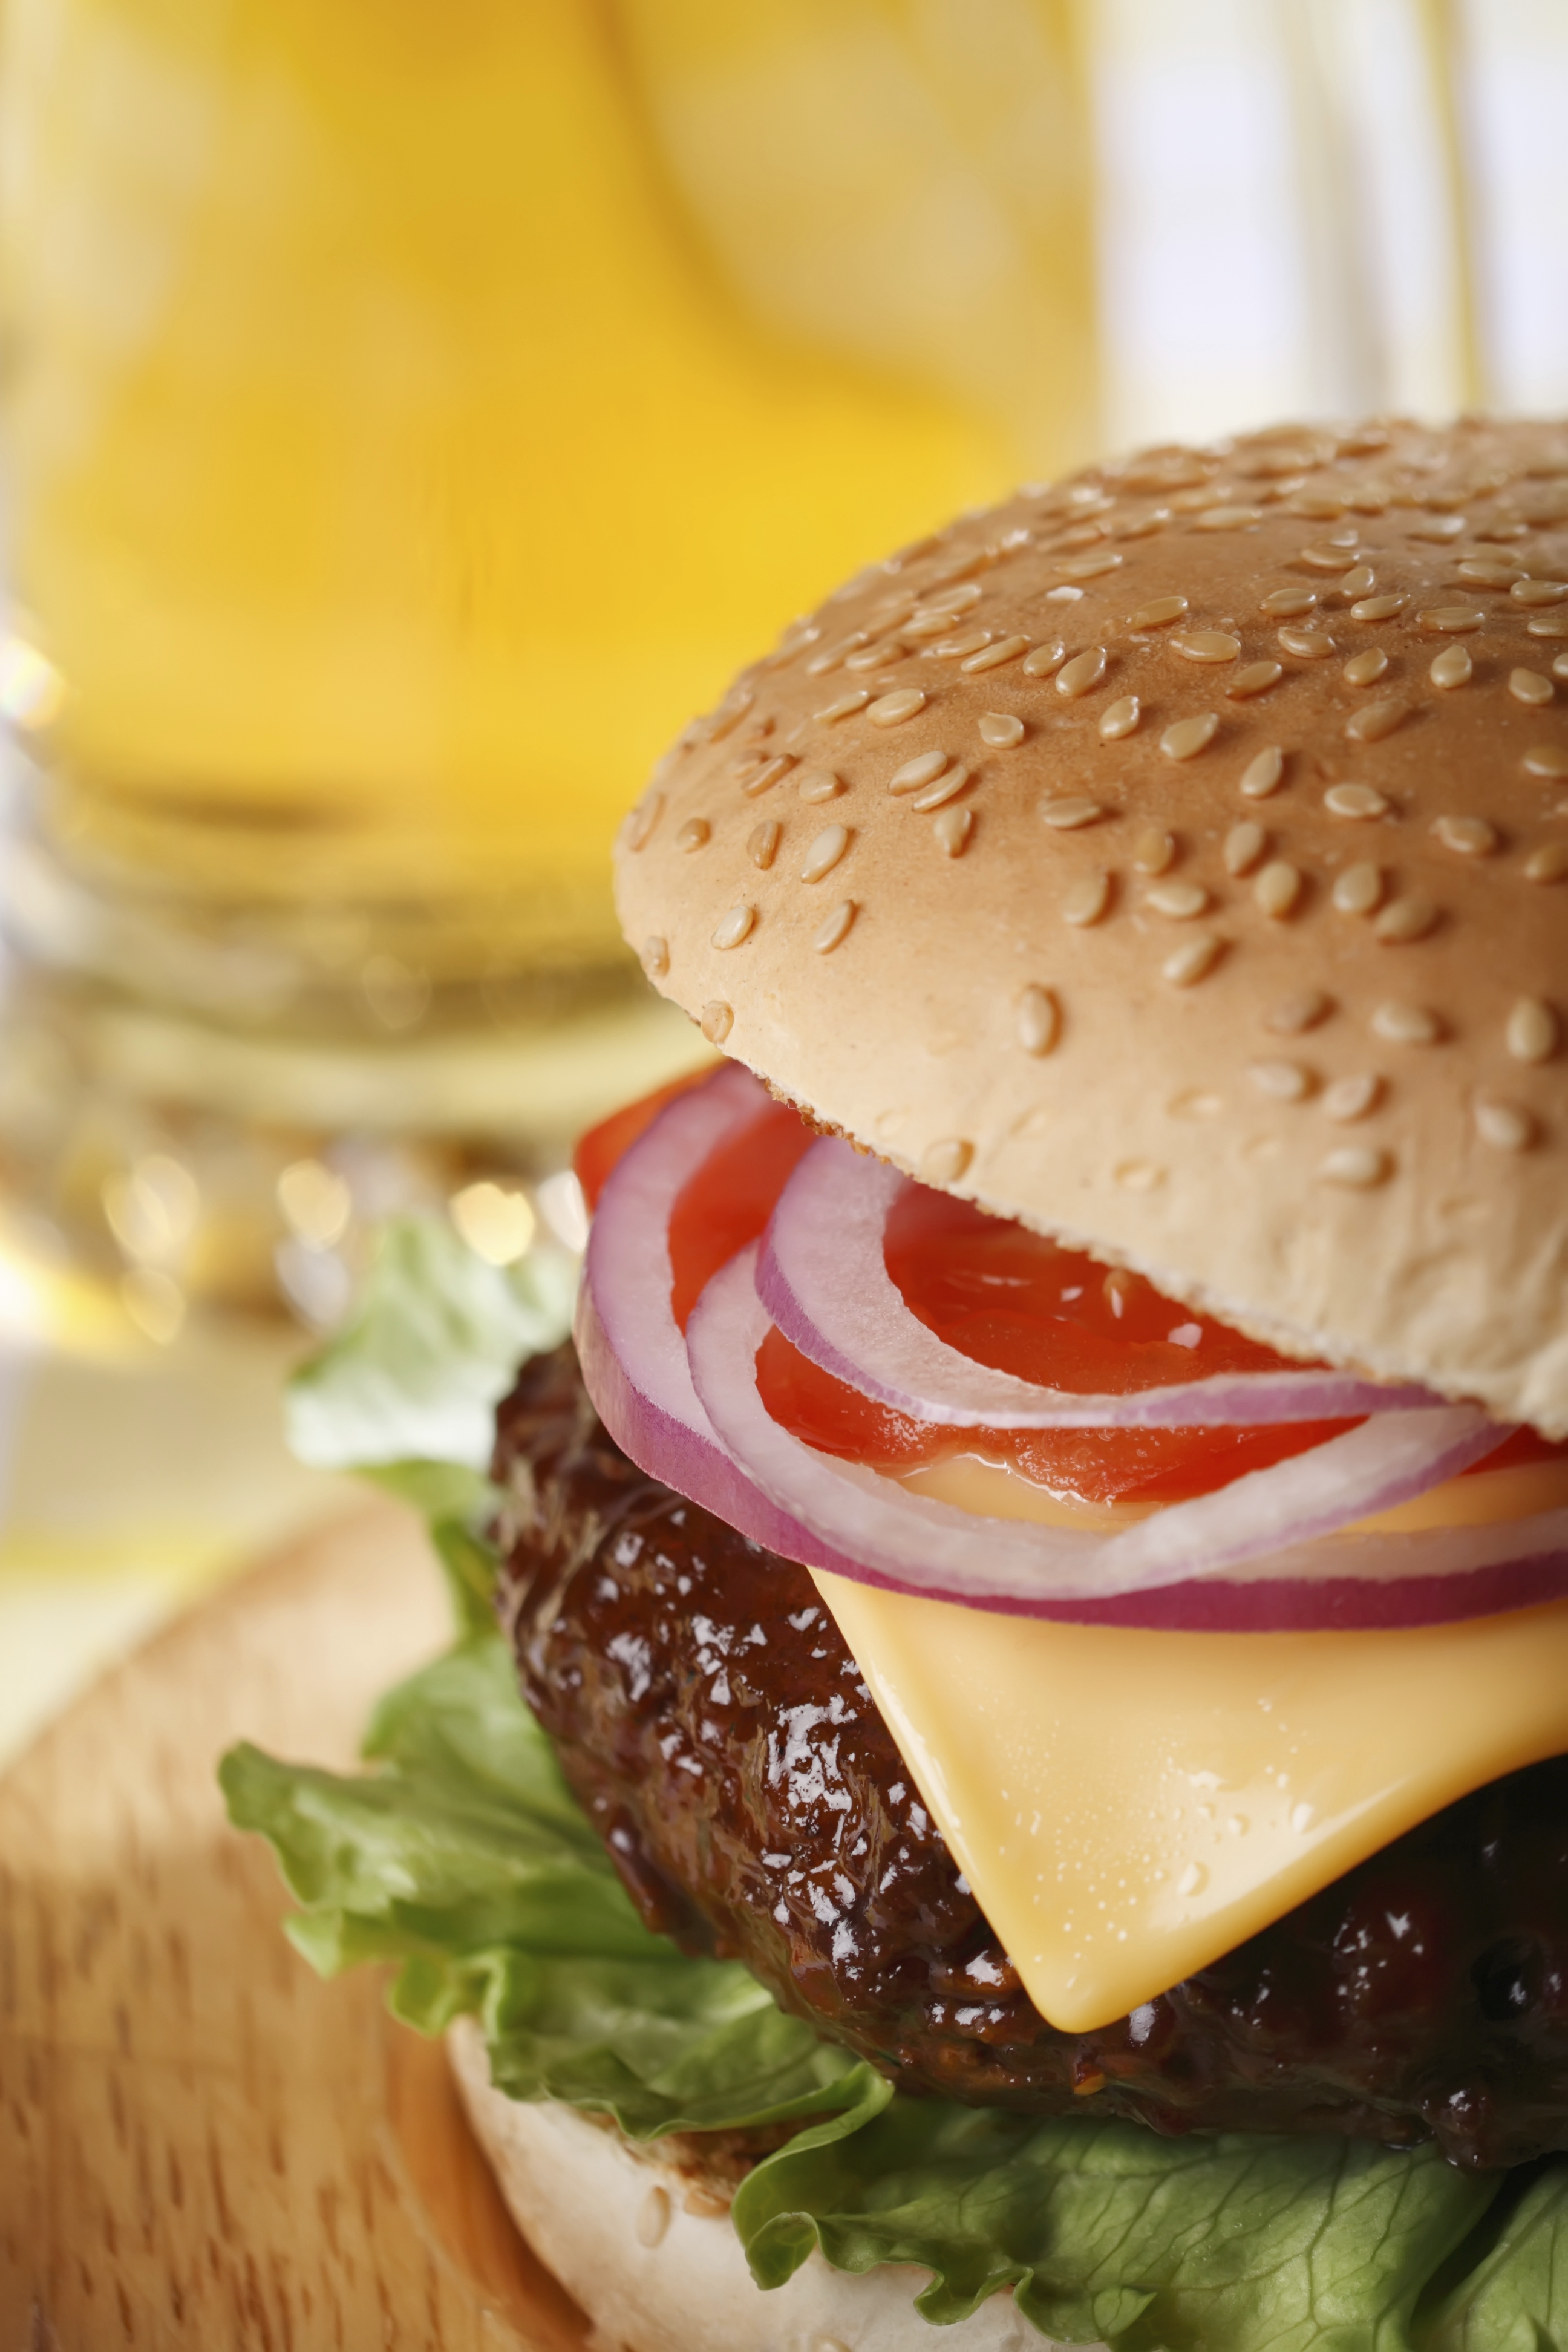 We have a reputation for great burgers - from the classics to crocodile and barramundi.